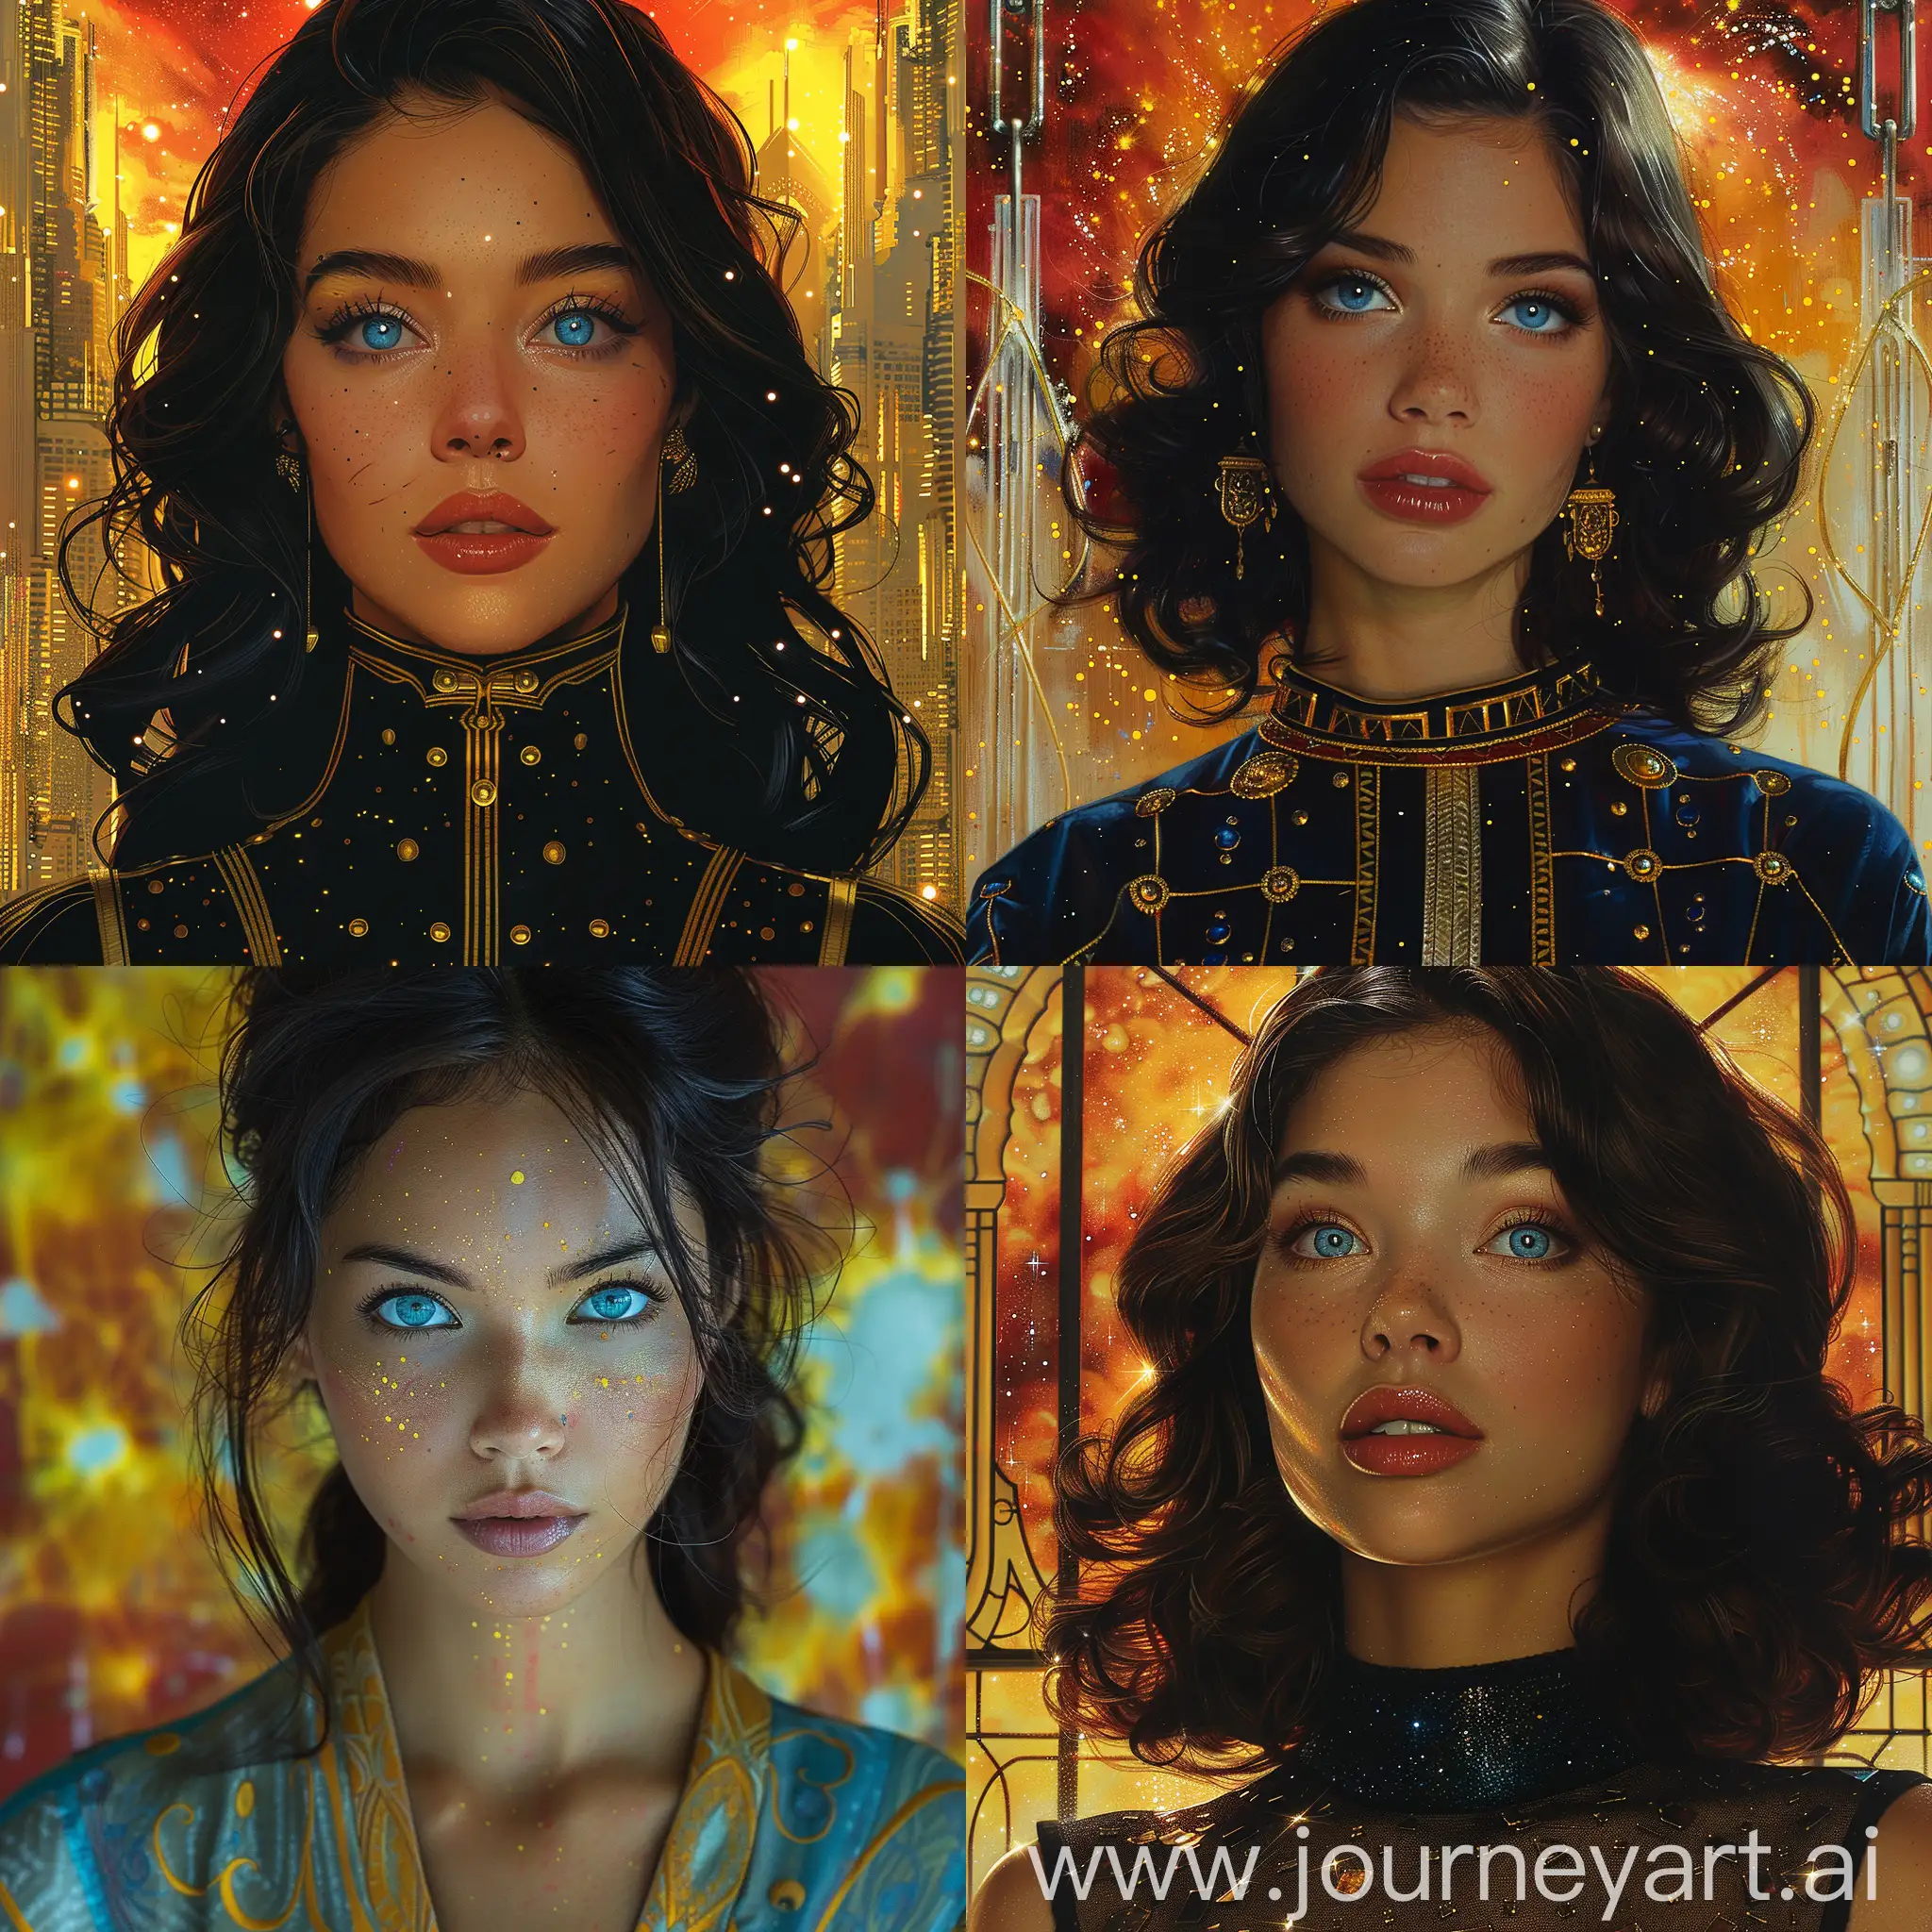 Stunning-Malay-Woman-with-Blue-Eyes-in-Biopunk-Style-with-Art-Deco-Accents-against-a-YellowRed-Space-Nebula-Background